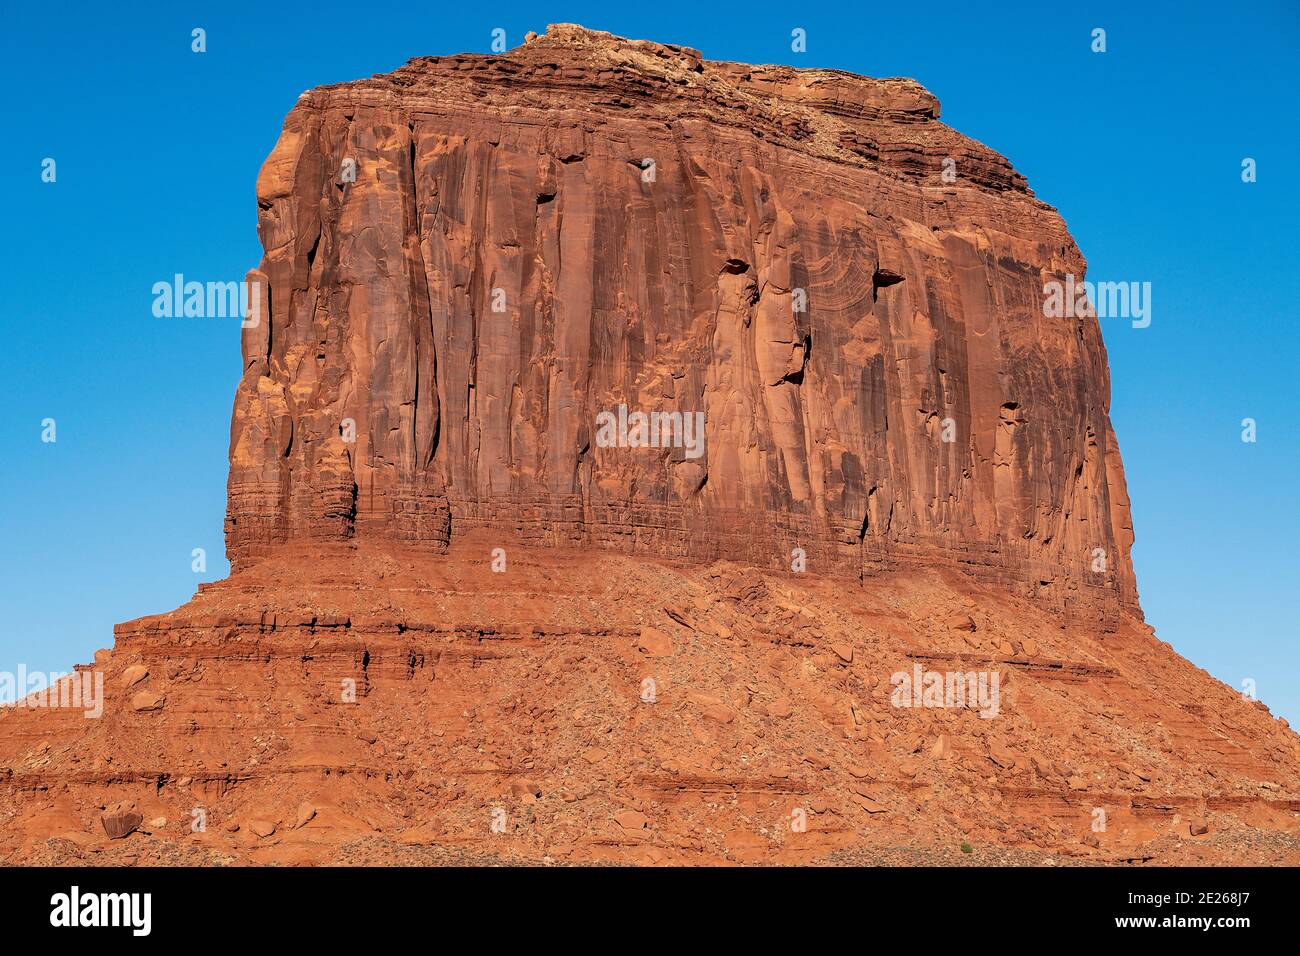 Merrick Butte rock formation in the Monument Valley Navajo Tribal Park which straddles the Arizona and Utah state line, USA Stock Photo